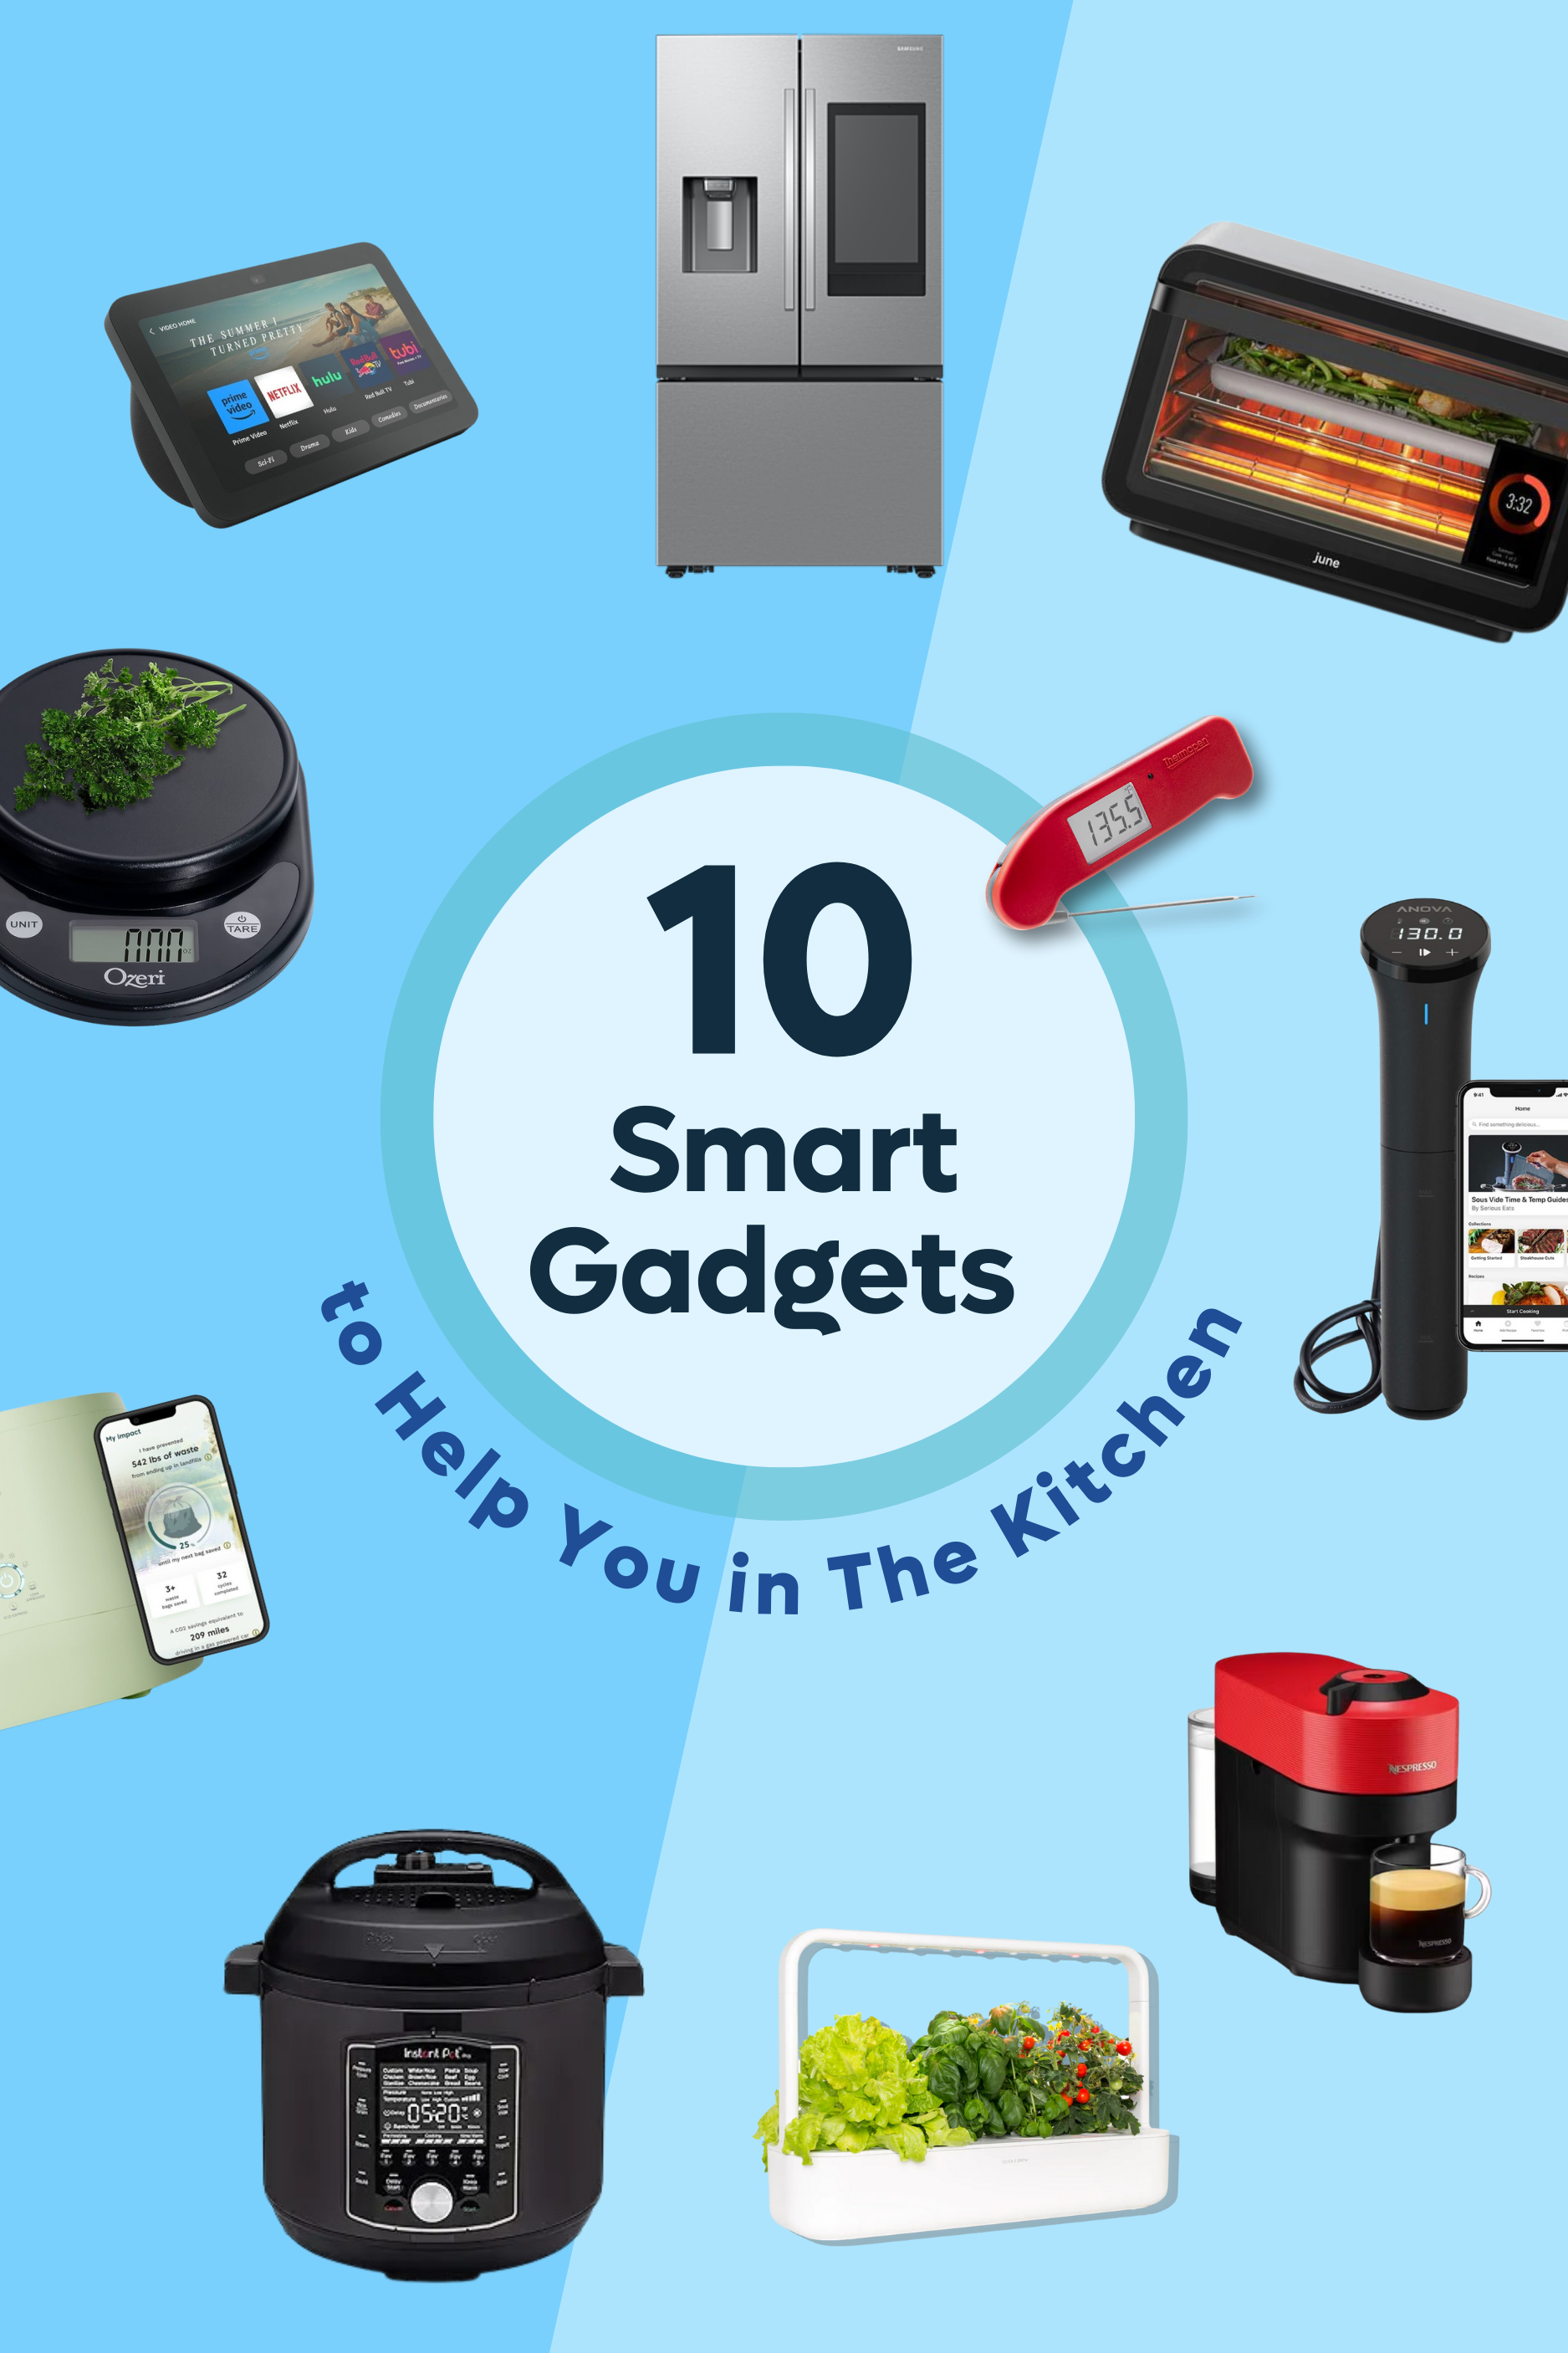 10 Smart Gadgets to Help You in The Kitchen